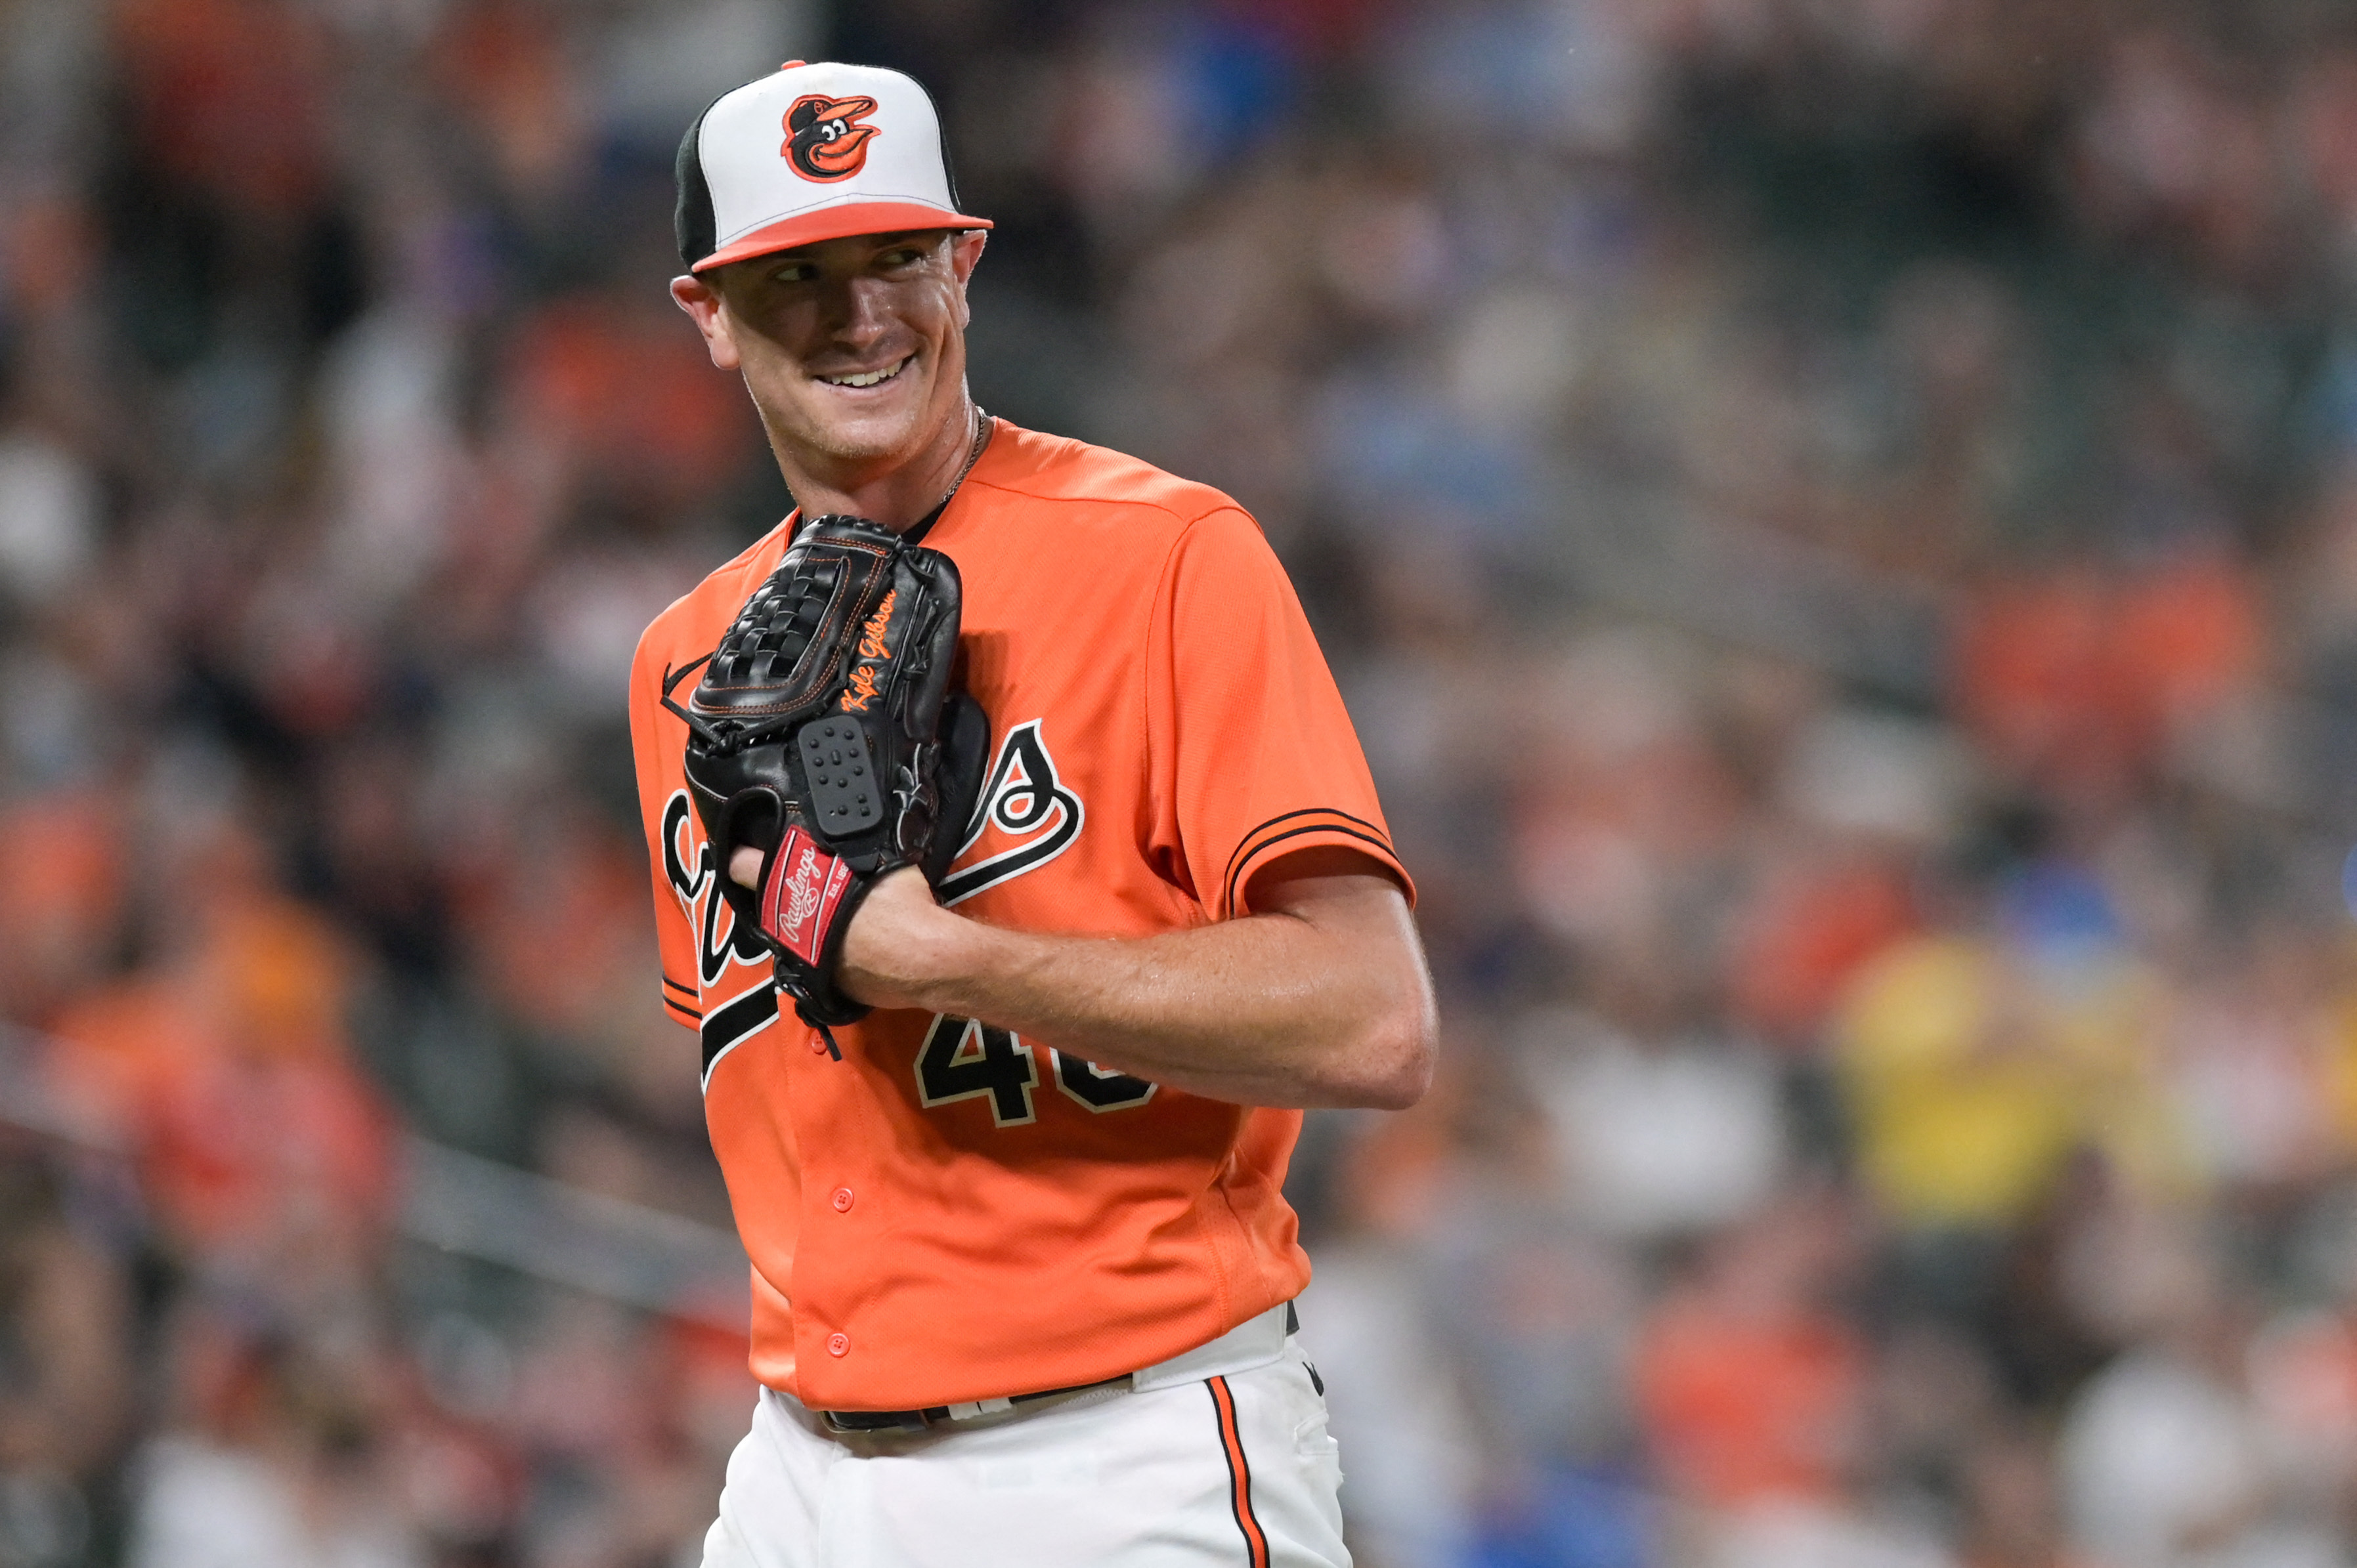 Orioles rally from 4-run deficit to beat Marlins 6-5 for 7th straight win -  ABC News